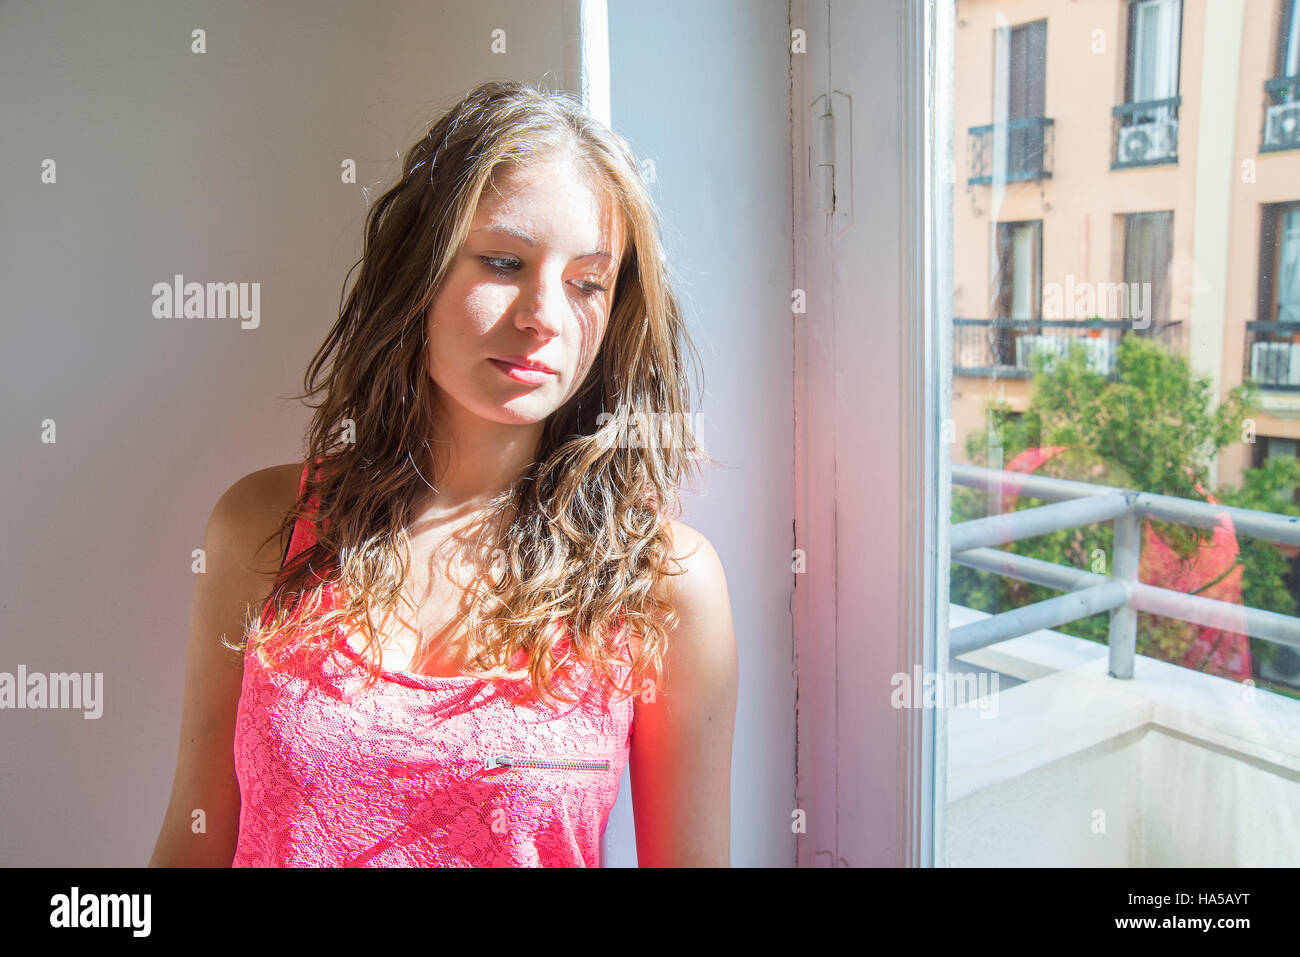 Young woman leaning against the wall and looking through the window. Stock Photo